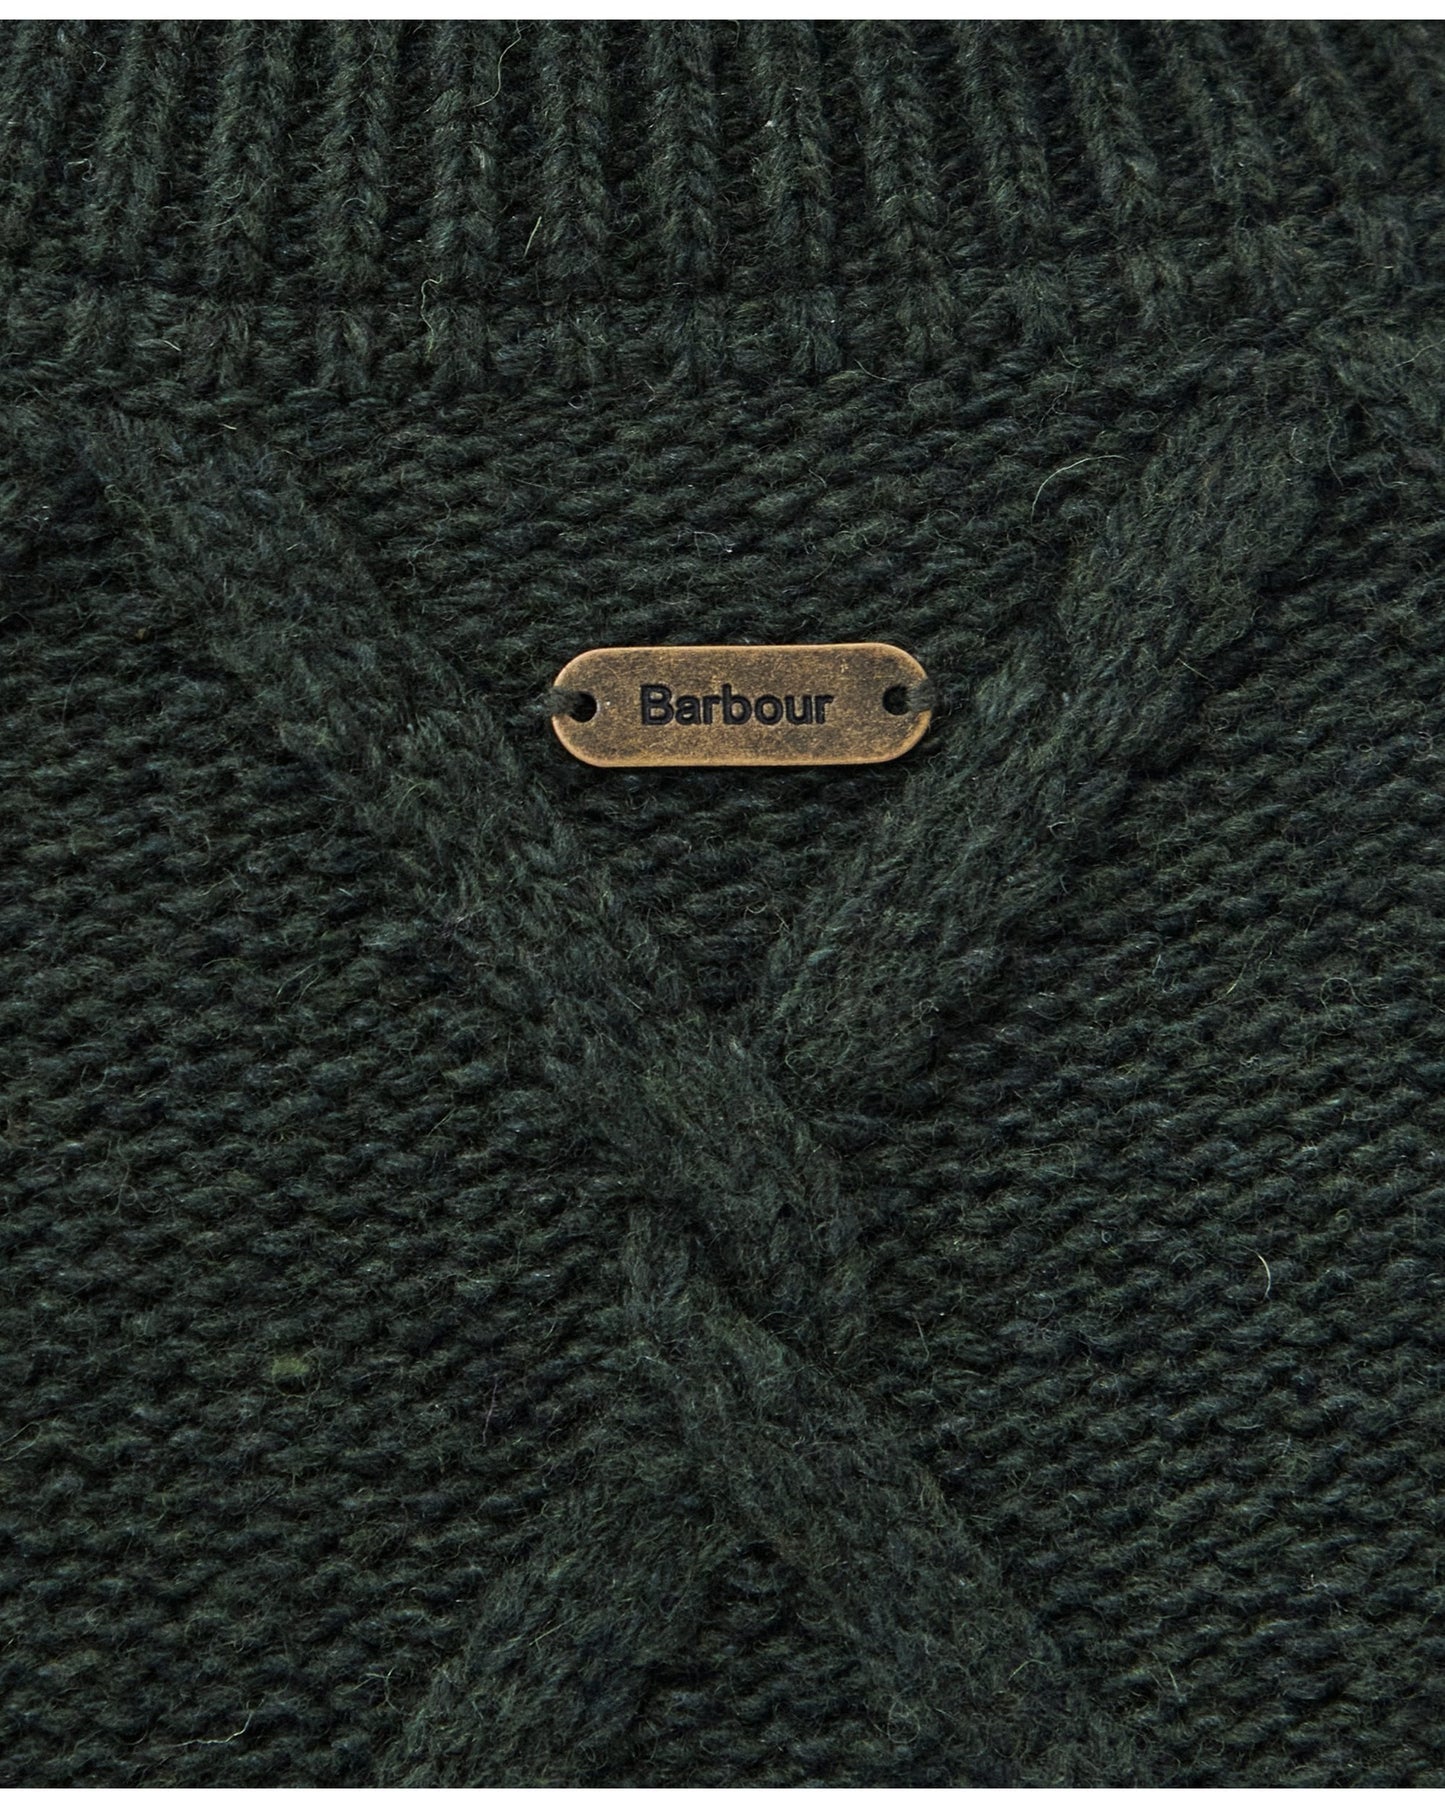 Perch Knitted Jumper